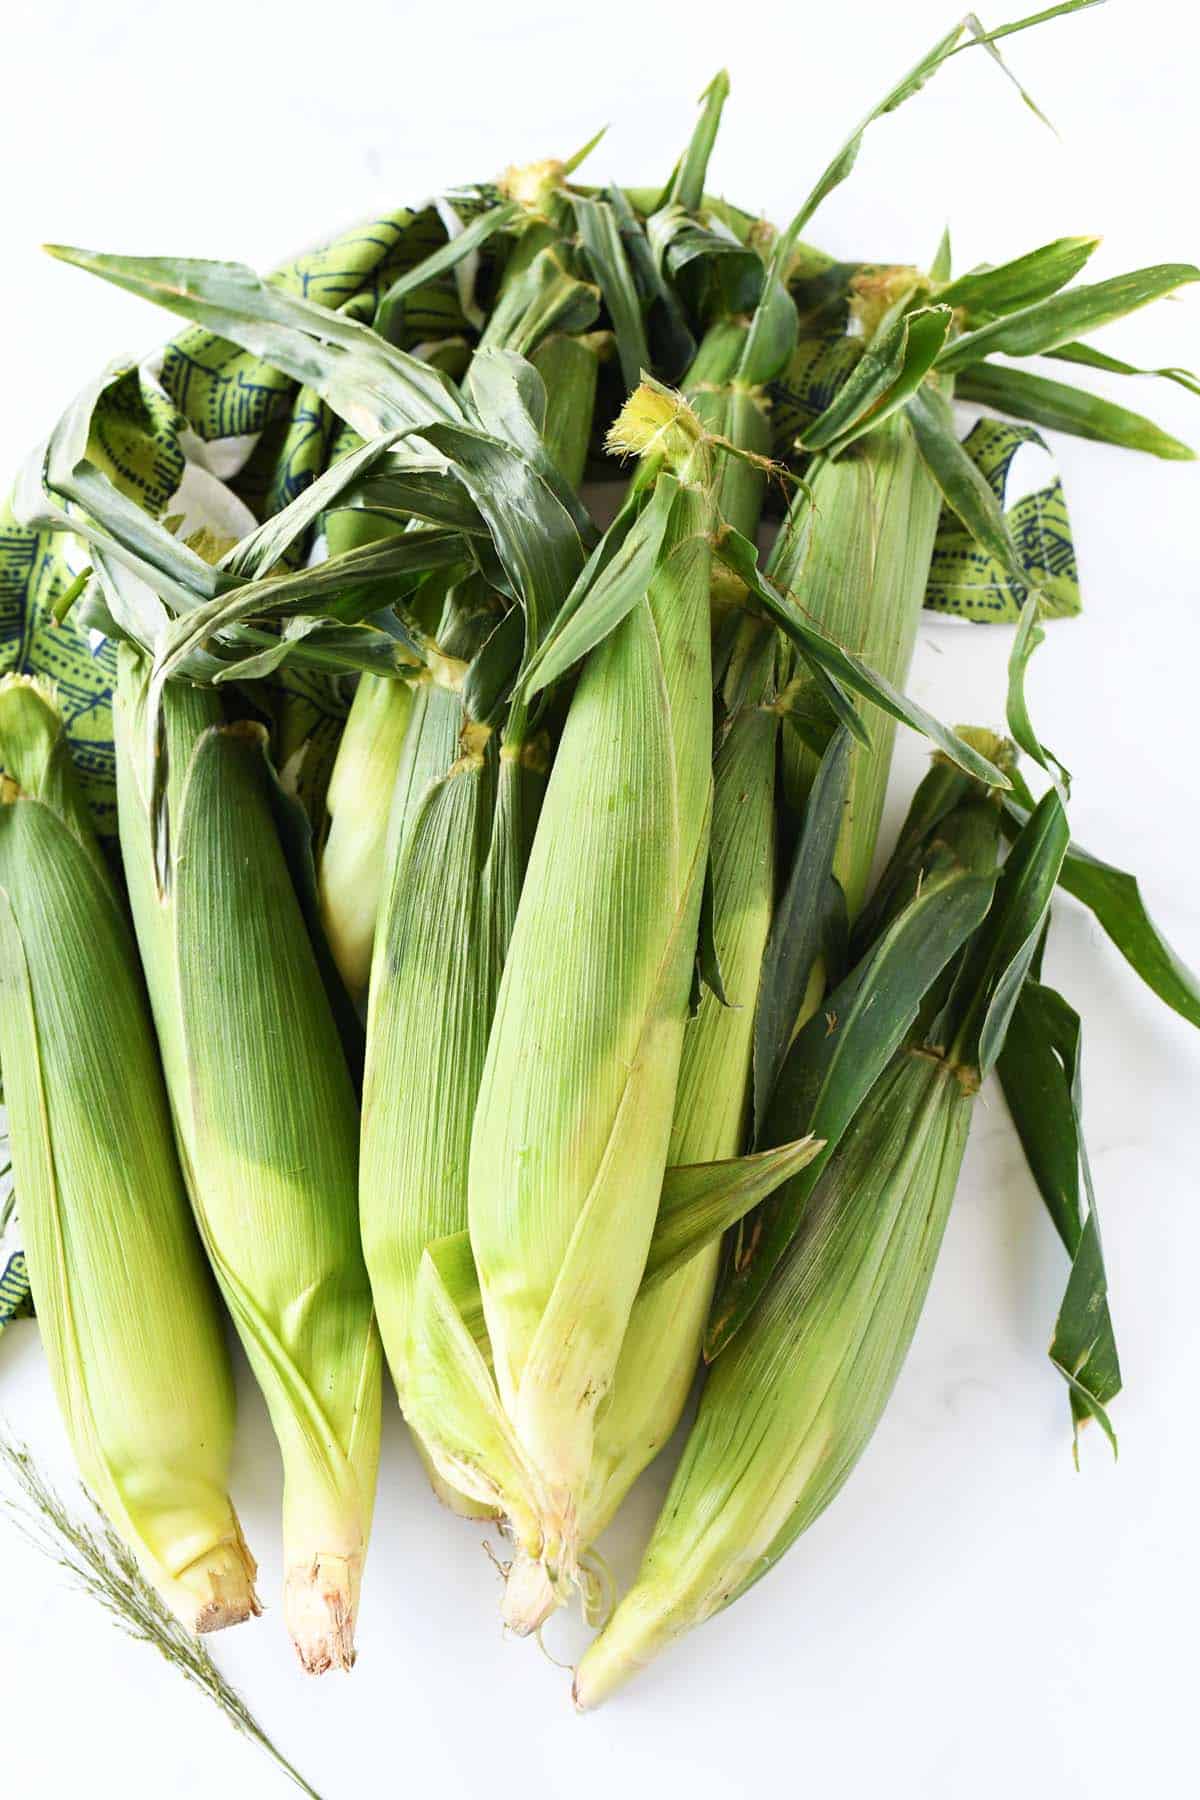 A pile of green sweet corn in husks on a white table.